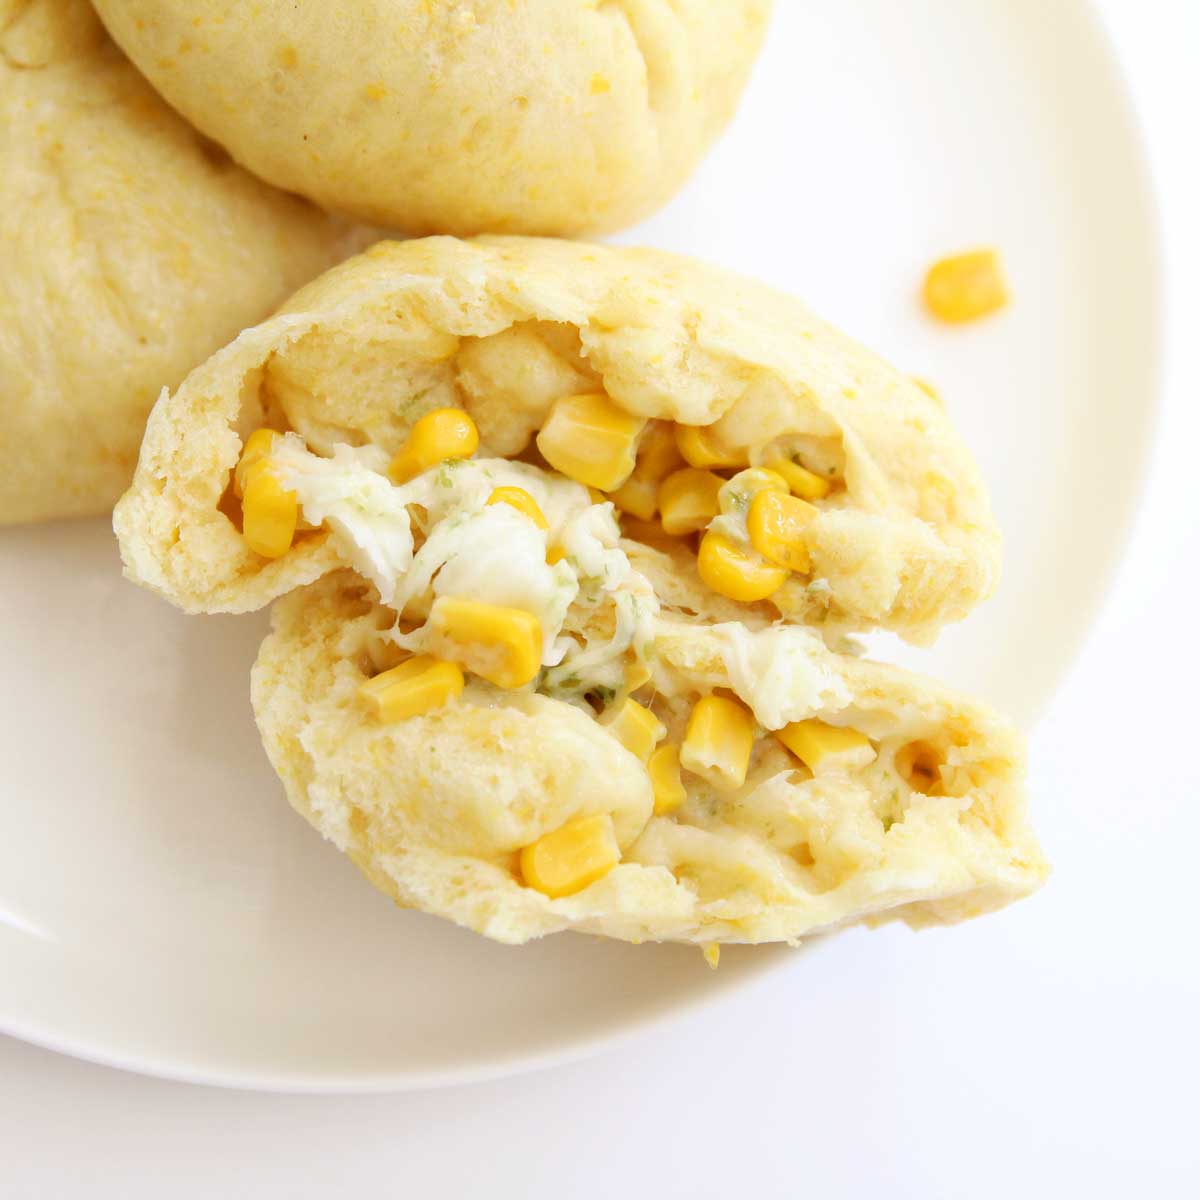 Savory "Cornbread" Steamed Buns with a Korean Cheese Corn Filling - nian gao